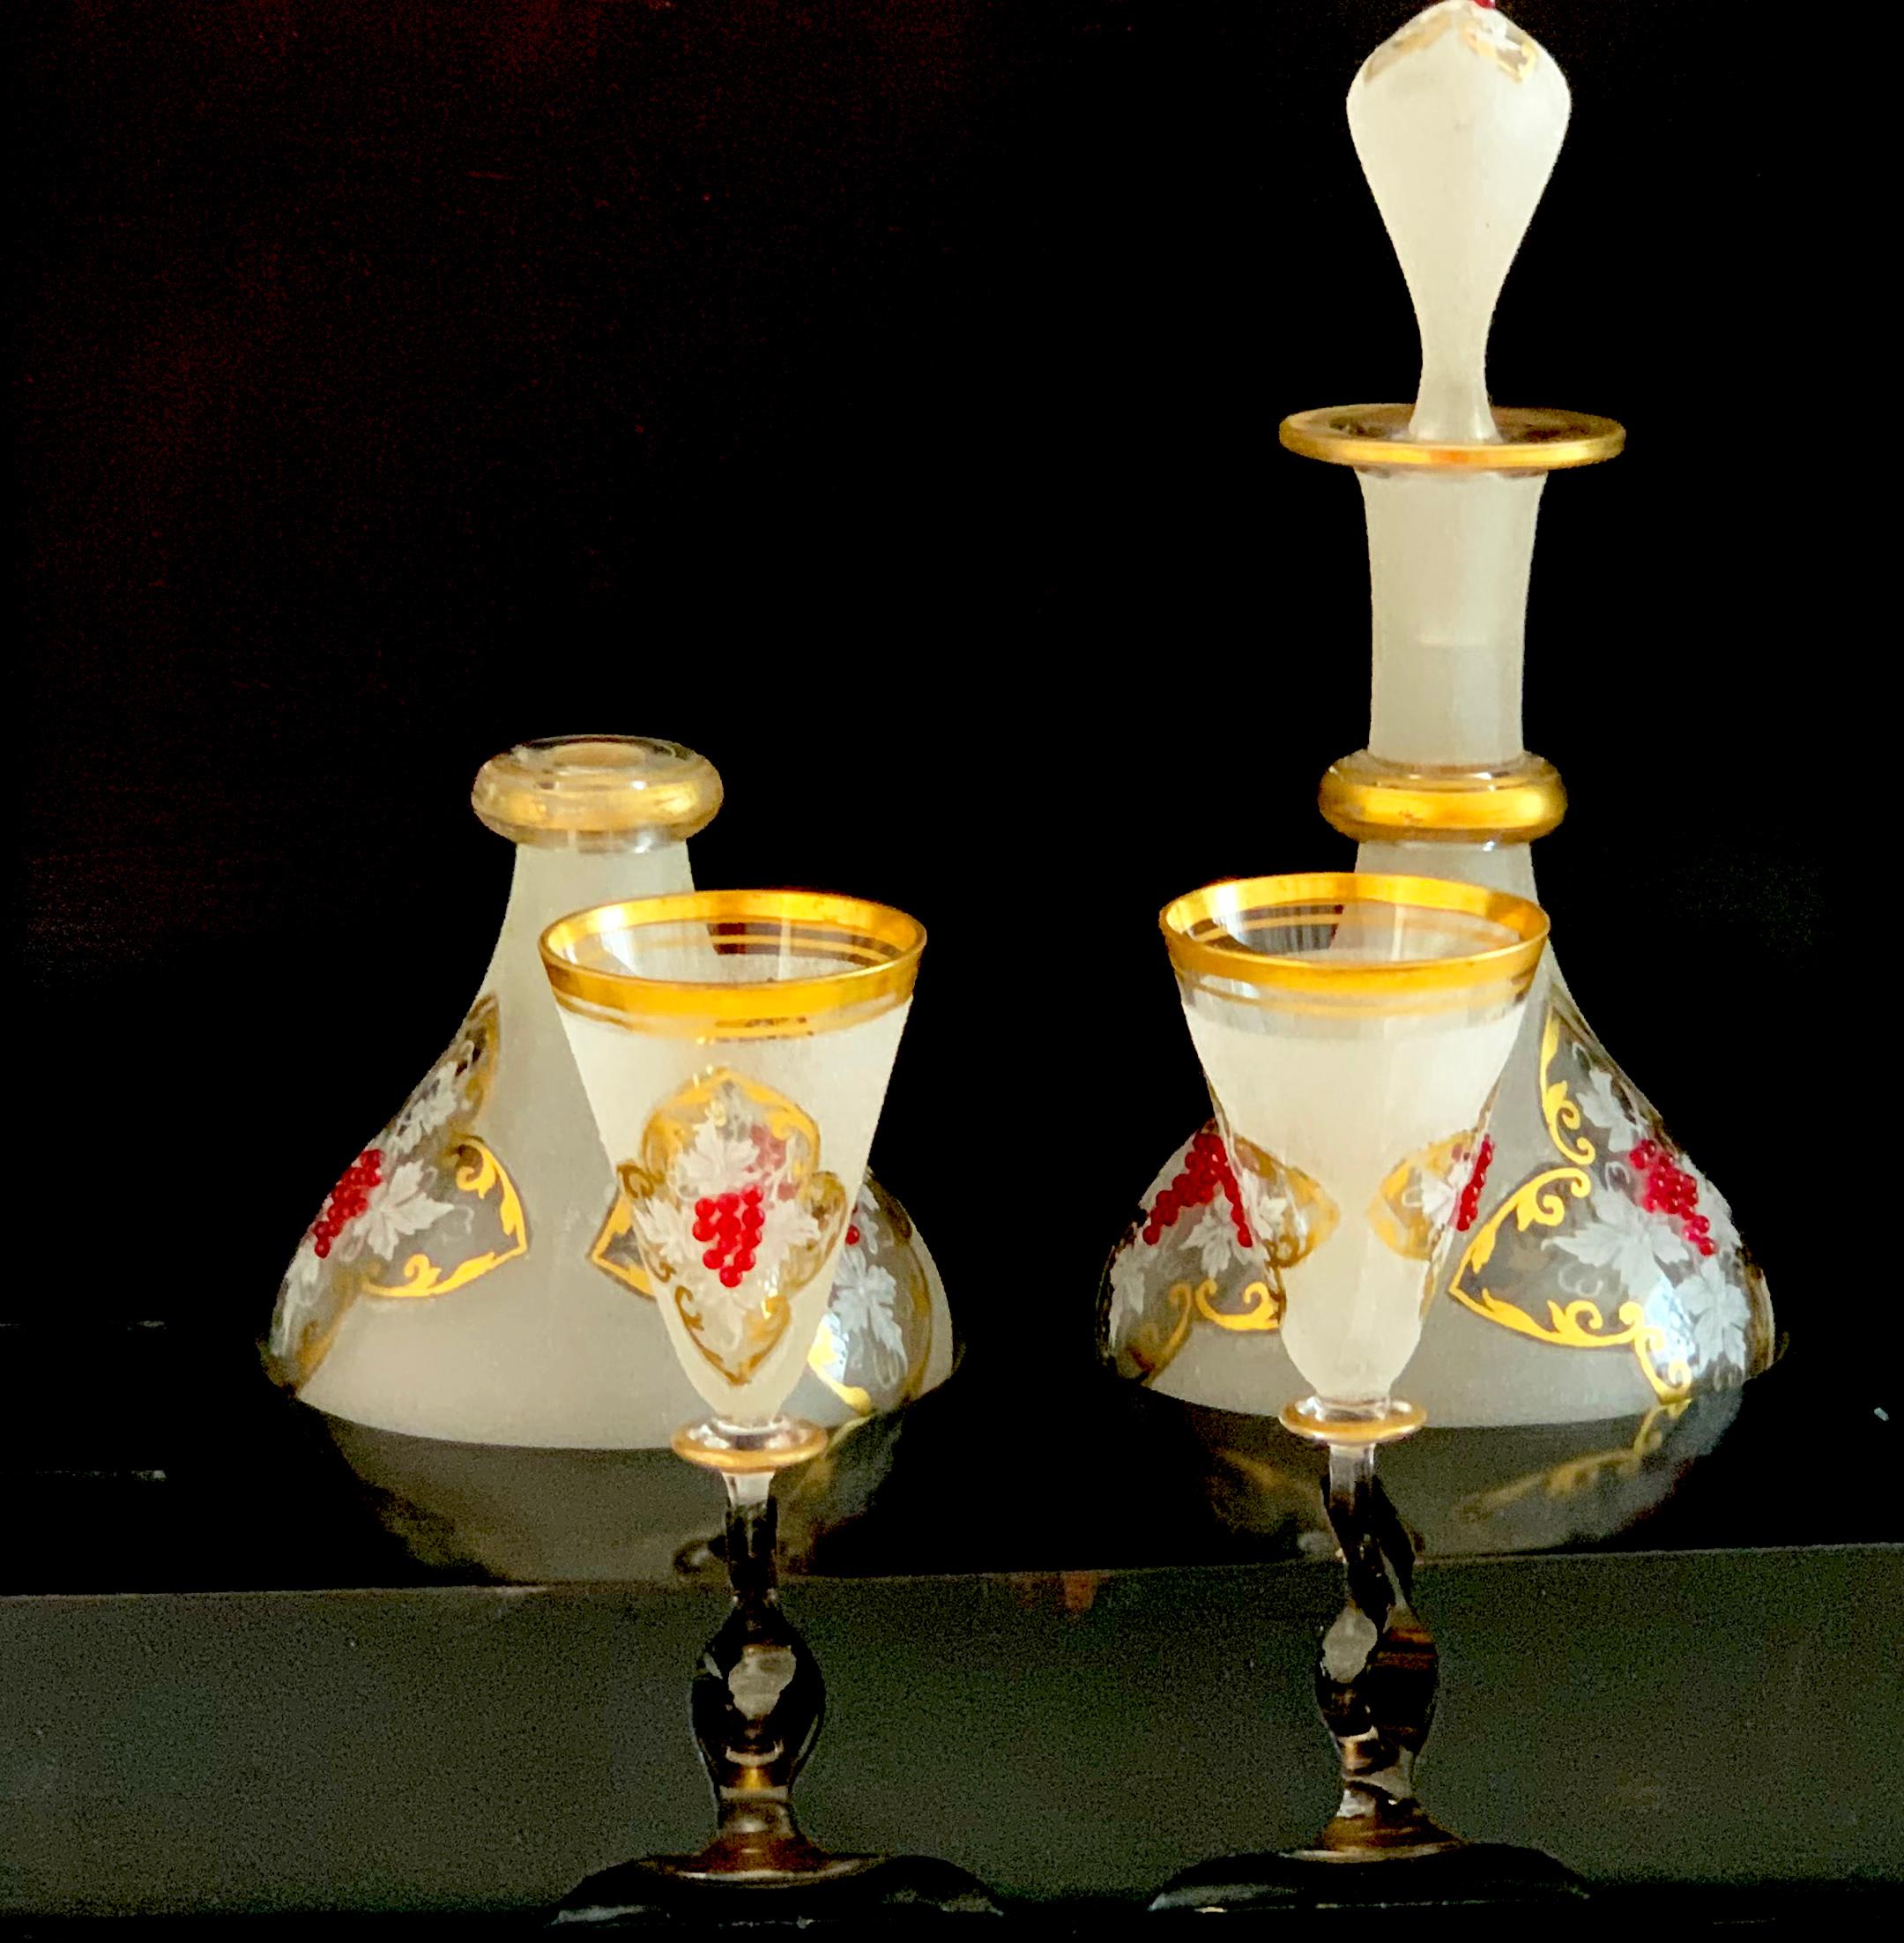 Beautiful dark wood box with two gold rimmed liquor glasses and two decanters with red pearls.
This lovely Travel Bar was made circa 1820 Biedermeier in Europe.
The box folds out on all sides to display the set. The box does not close.